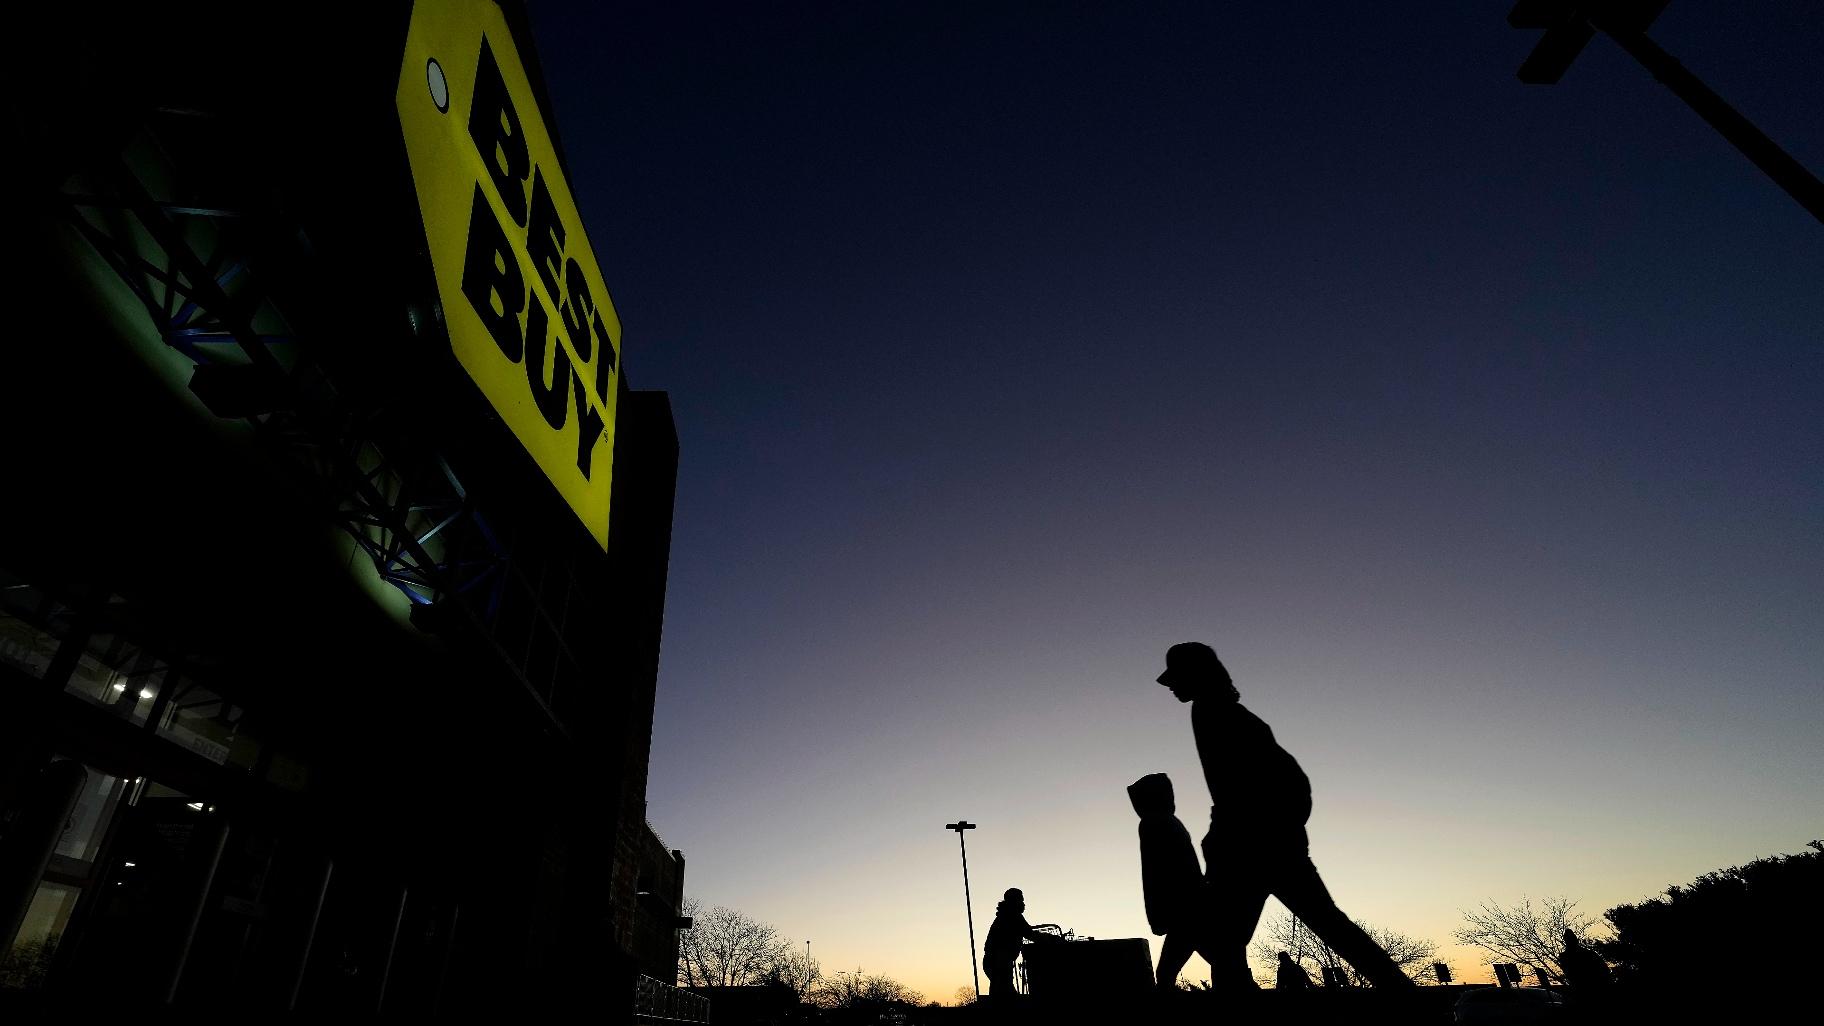 Shoppers are silhouetted against the sky as they arrives for a sale at a Best Buy store Friday, Nov. 25, 2022, in Overland Park, Kan. (AP Photo / Charlie Riedel, File)